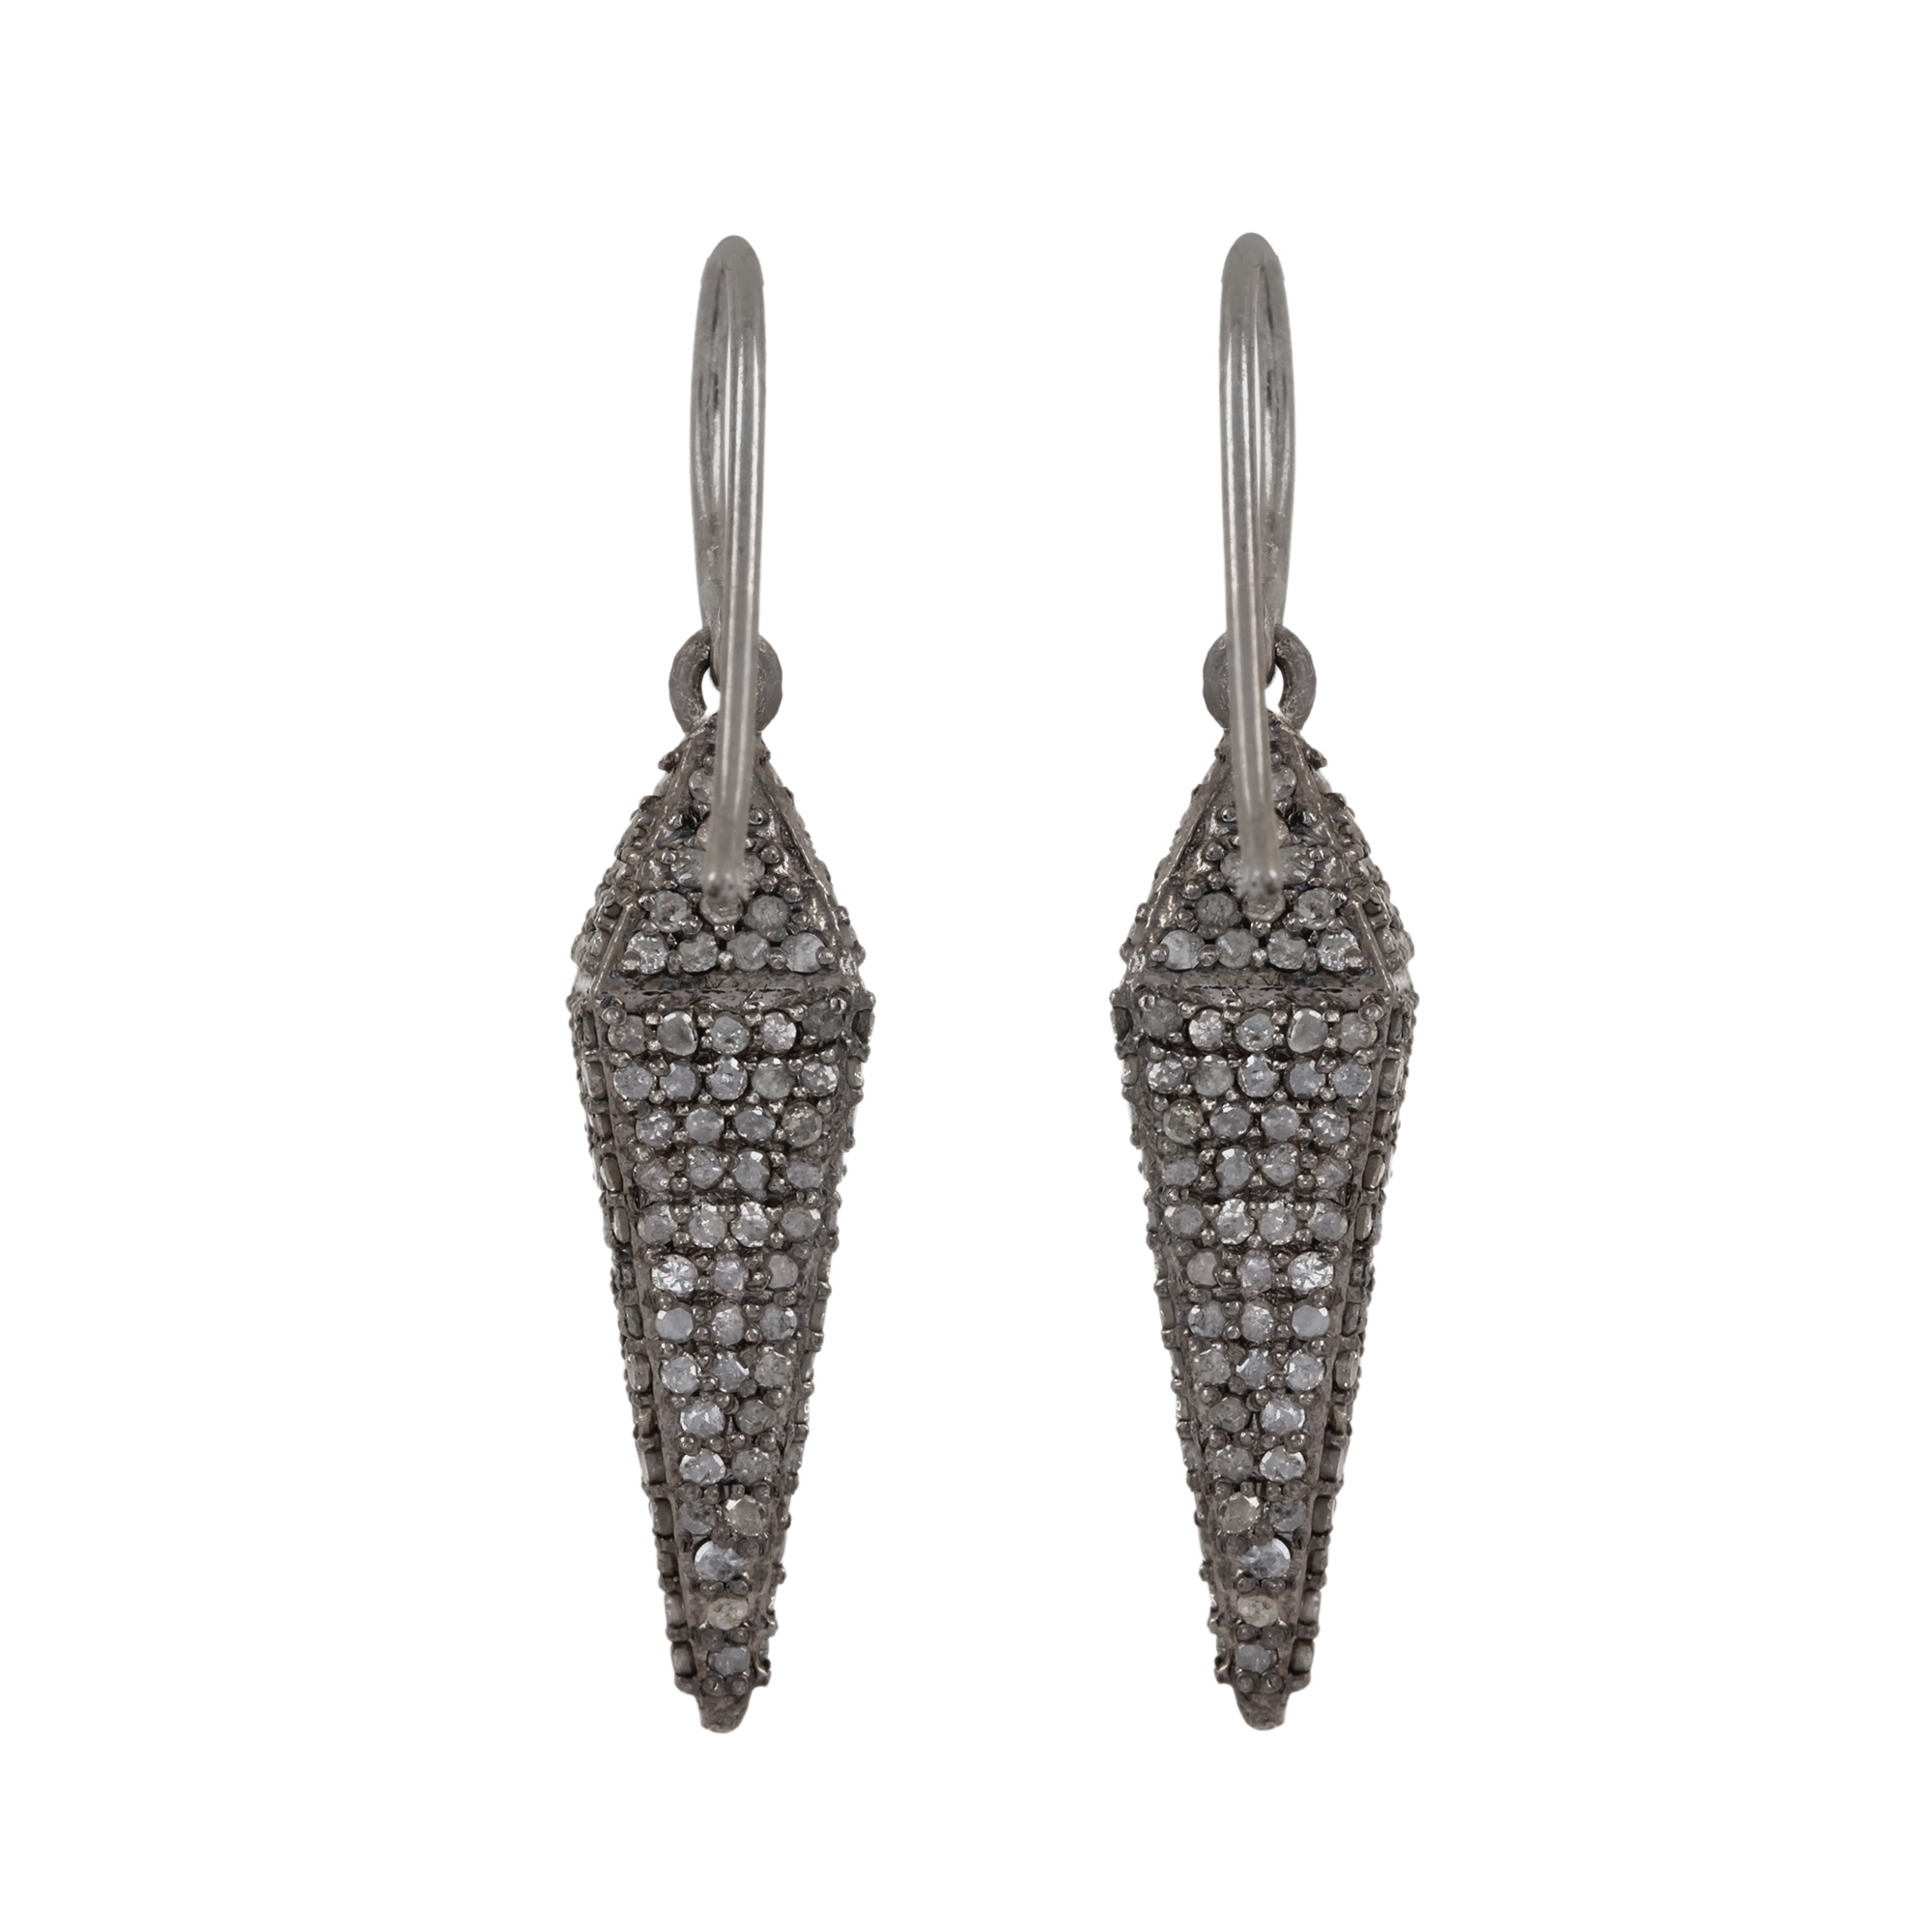 925 sterling silver Hook earrings adorned with natural diamond